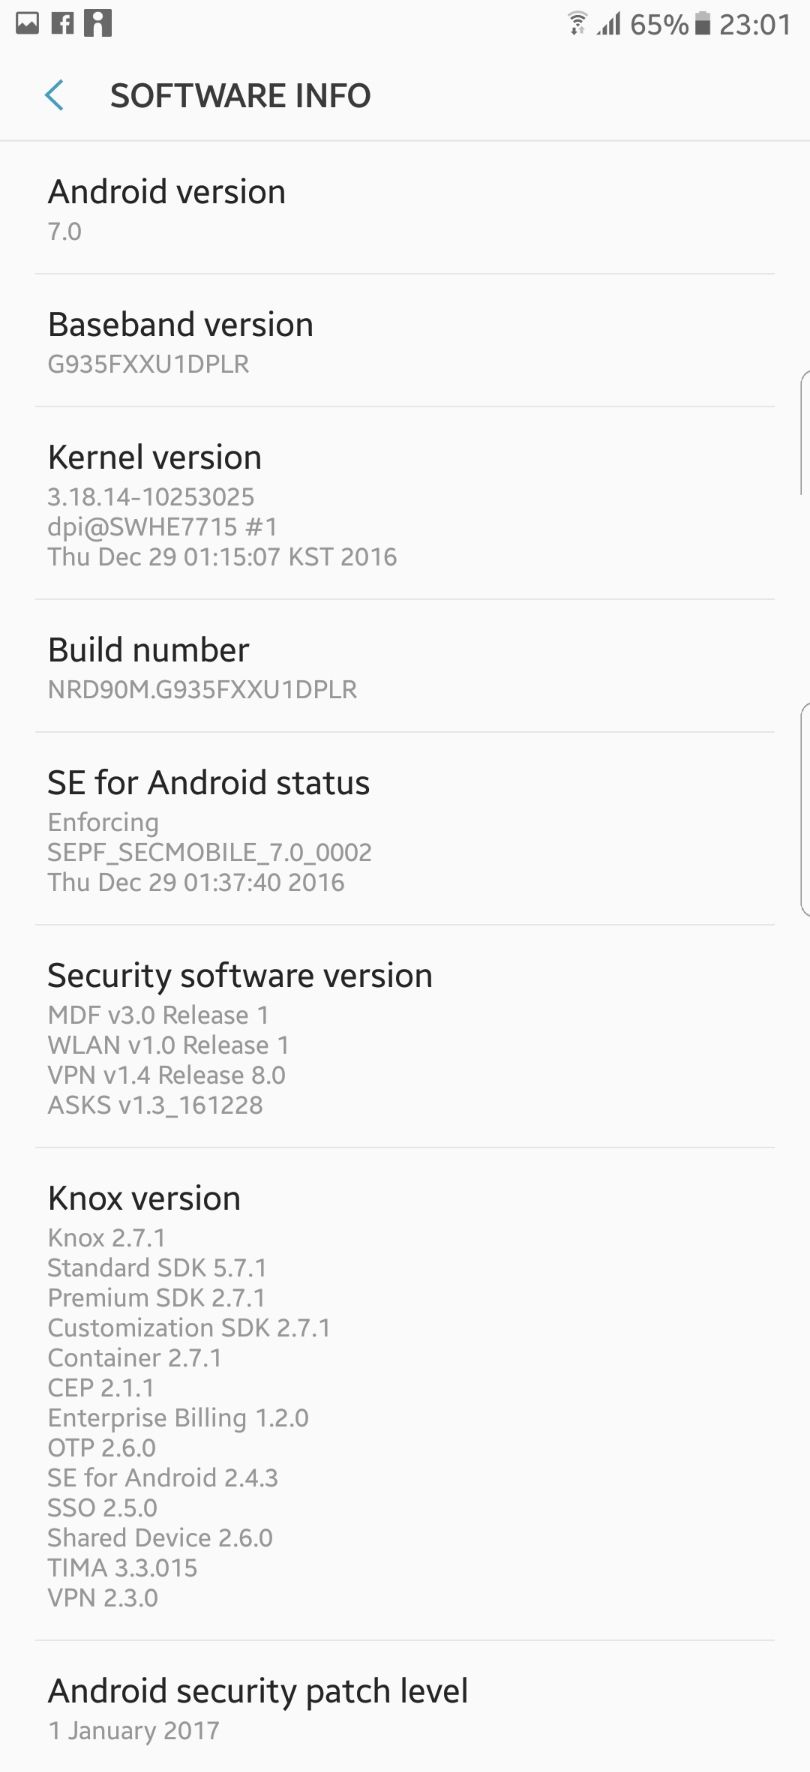 Samsung quietly rolls out Android Nougat update for some Galaxy S7 users